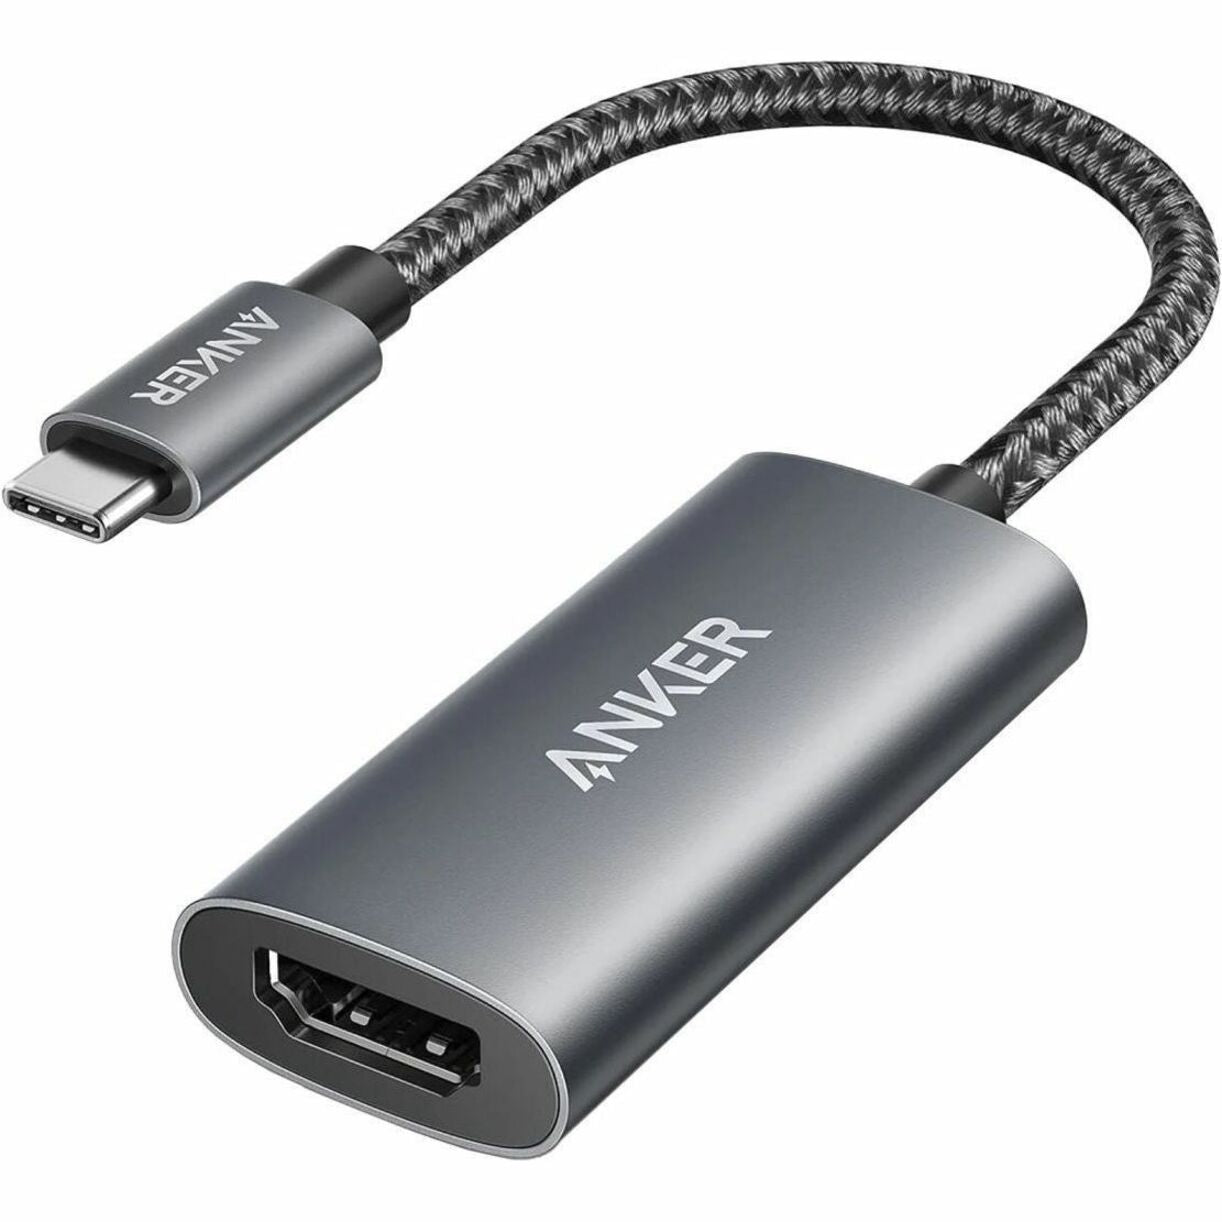 ANKER A8317HA1 HDMI/USB-C Audio/Video Adapter, Plug and Play Solution for Enhanced Connectivity